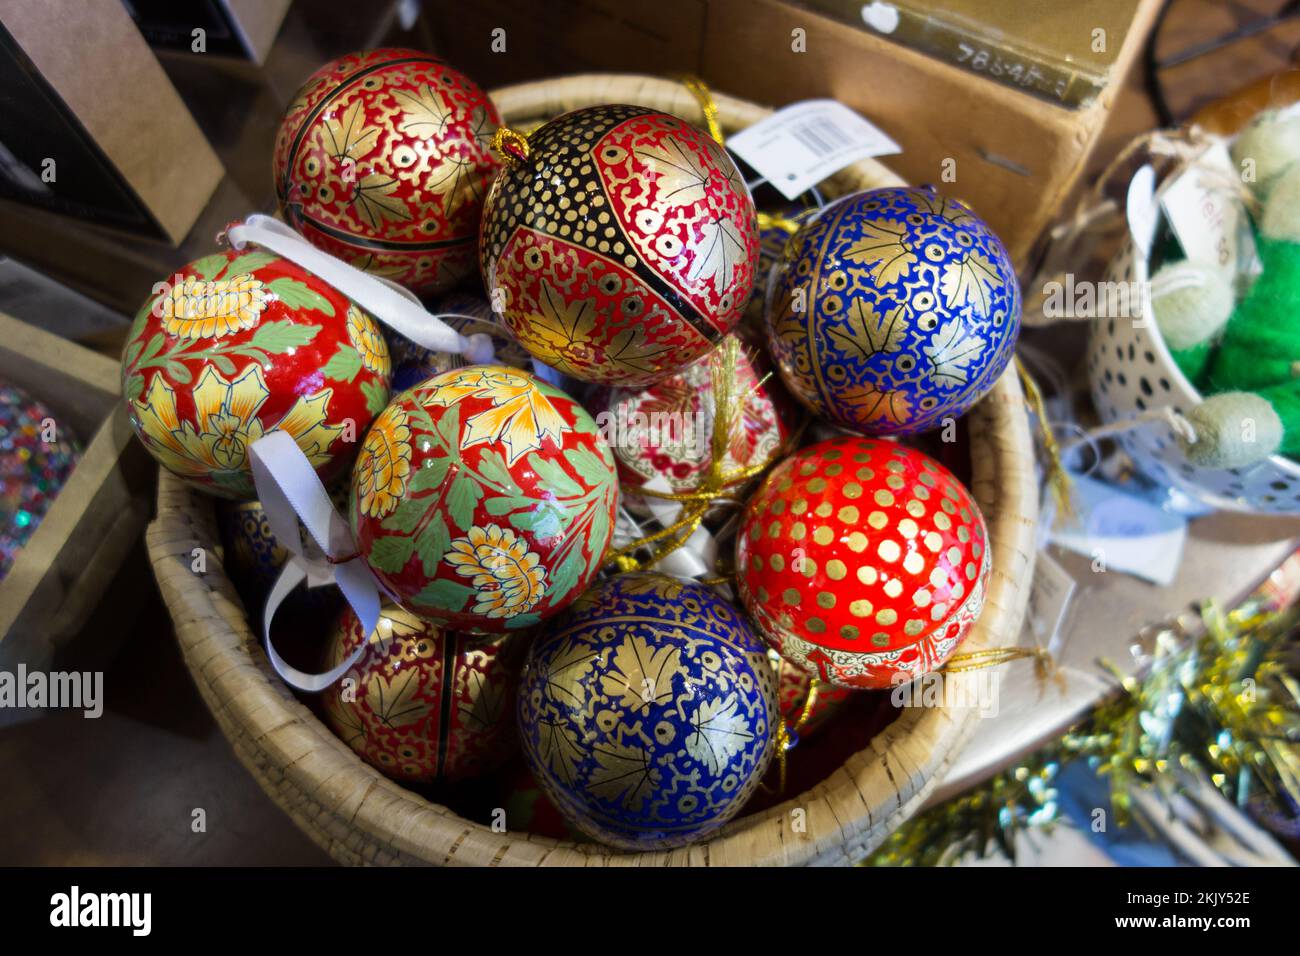 Closeup of colourful Christmas decorations and baubles in a shop Stock Photo